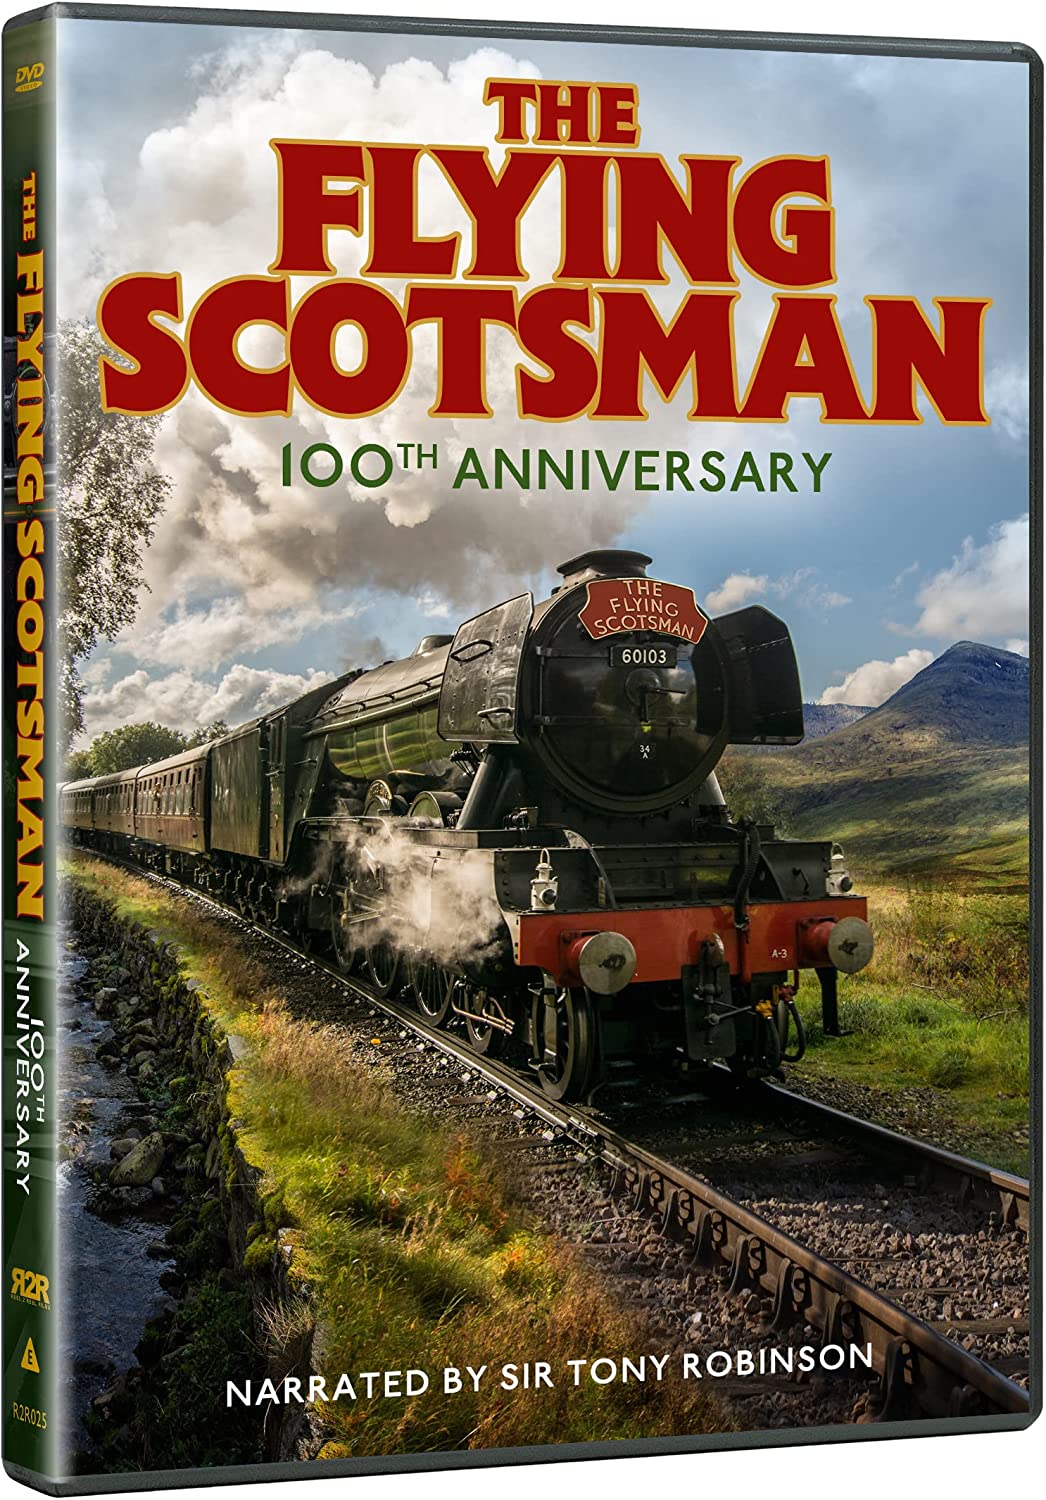 The flying scotsman DVD cover